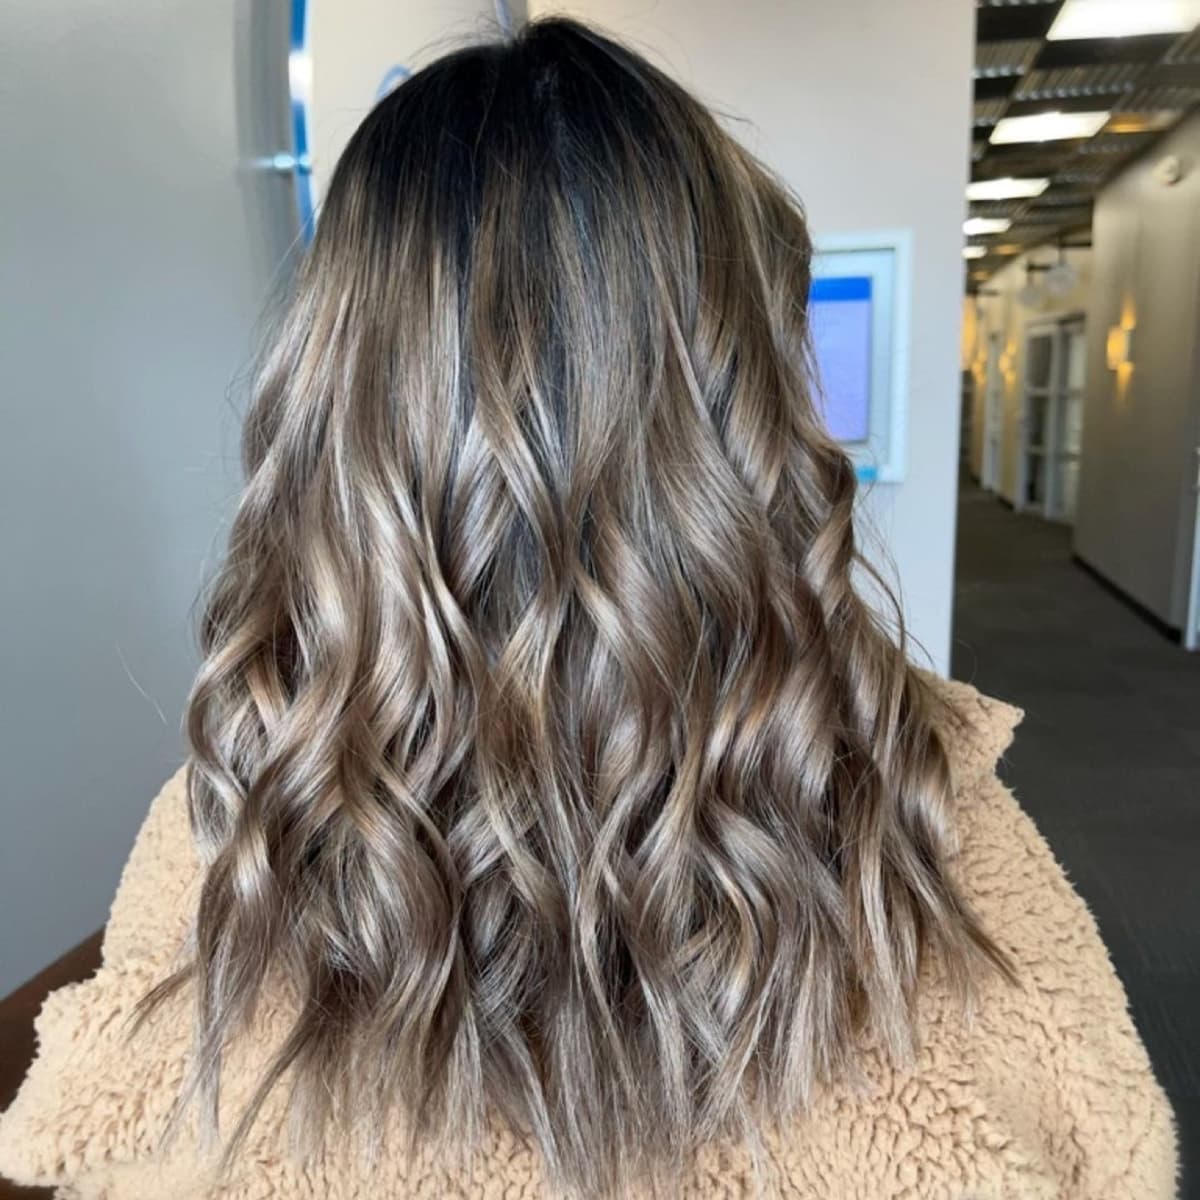 Low-Maintenance Mushroom Brown with Lighter Ends